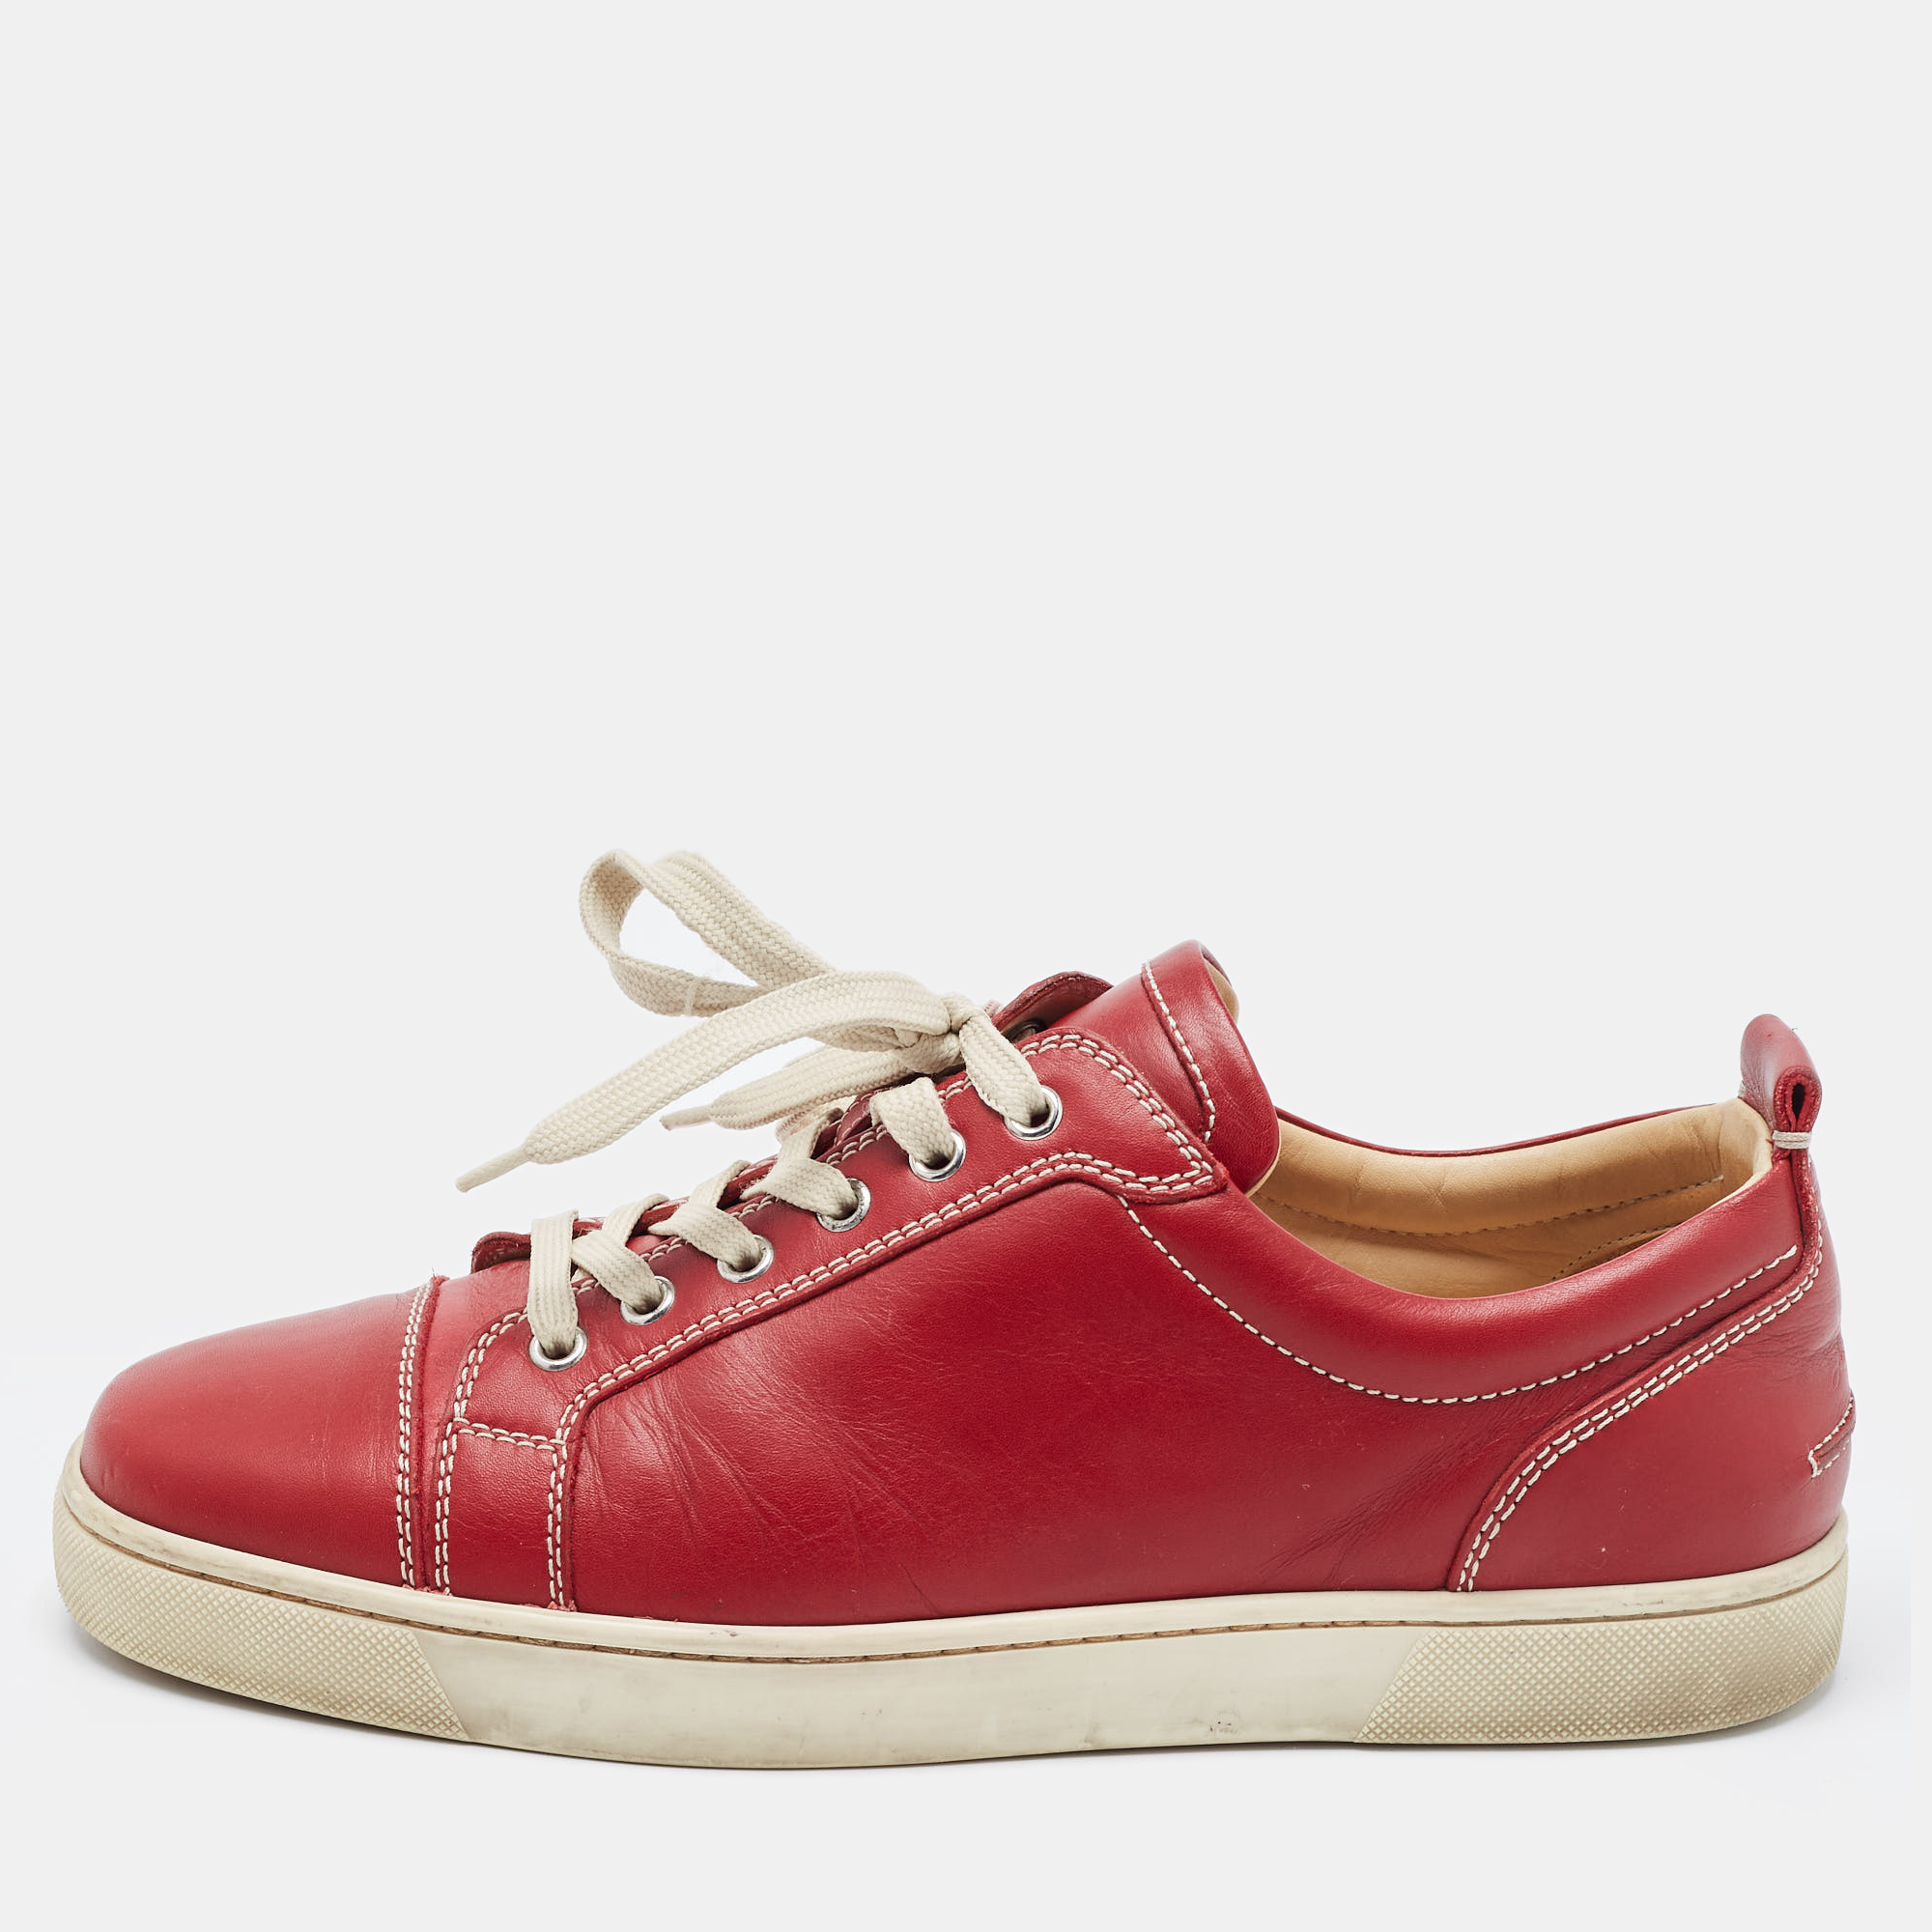 Pre-owned Christian Louboutin Red Leather Sneakers Size 42.5